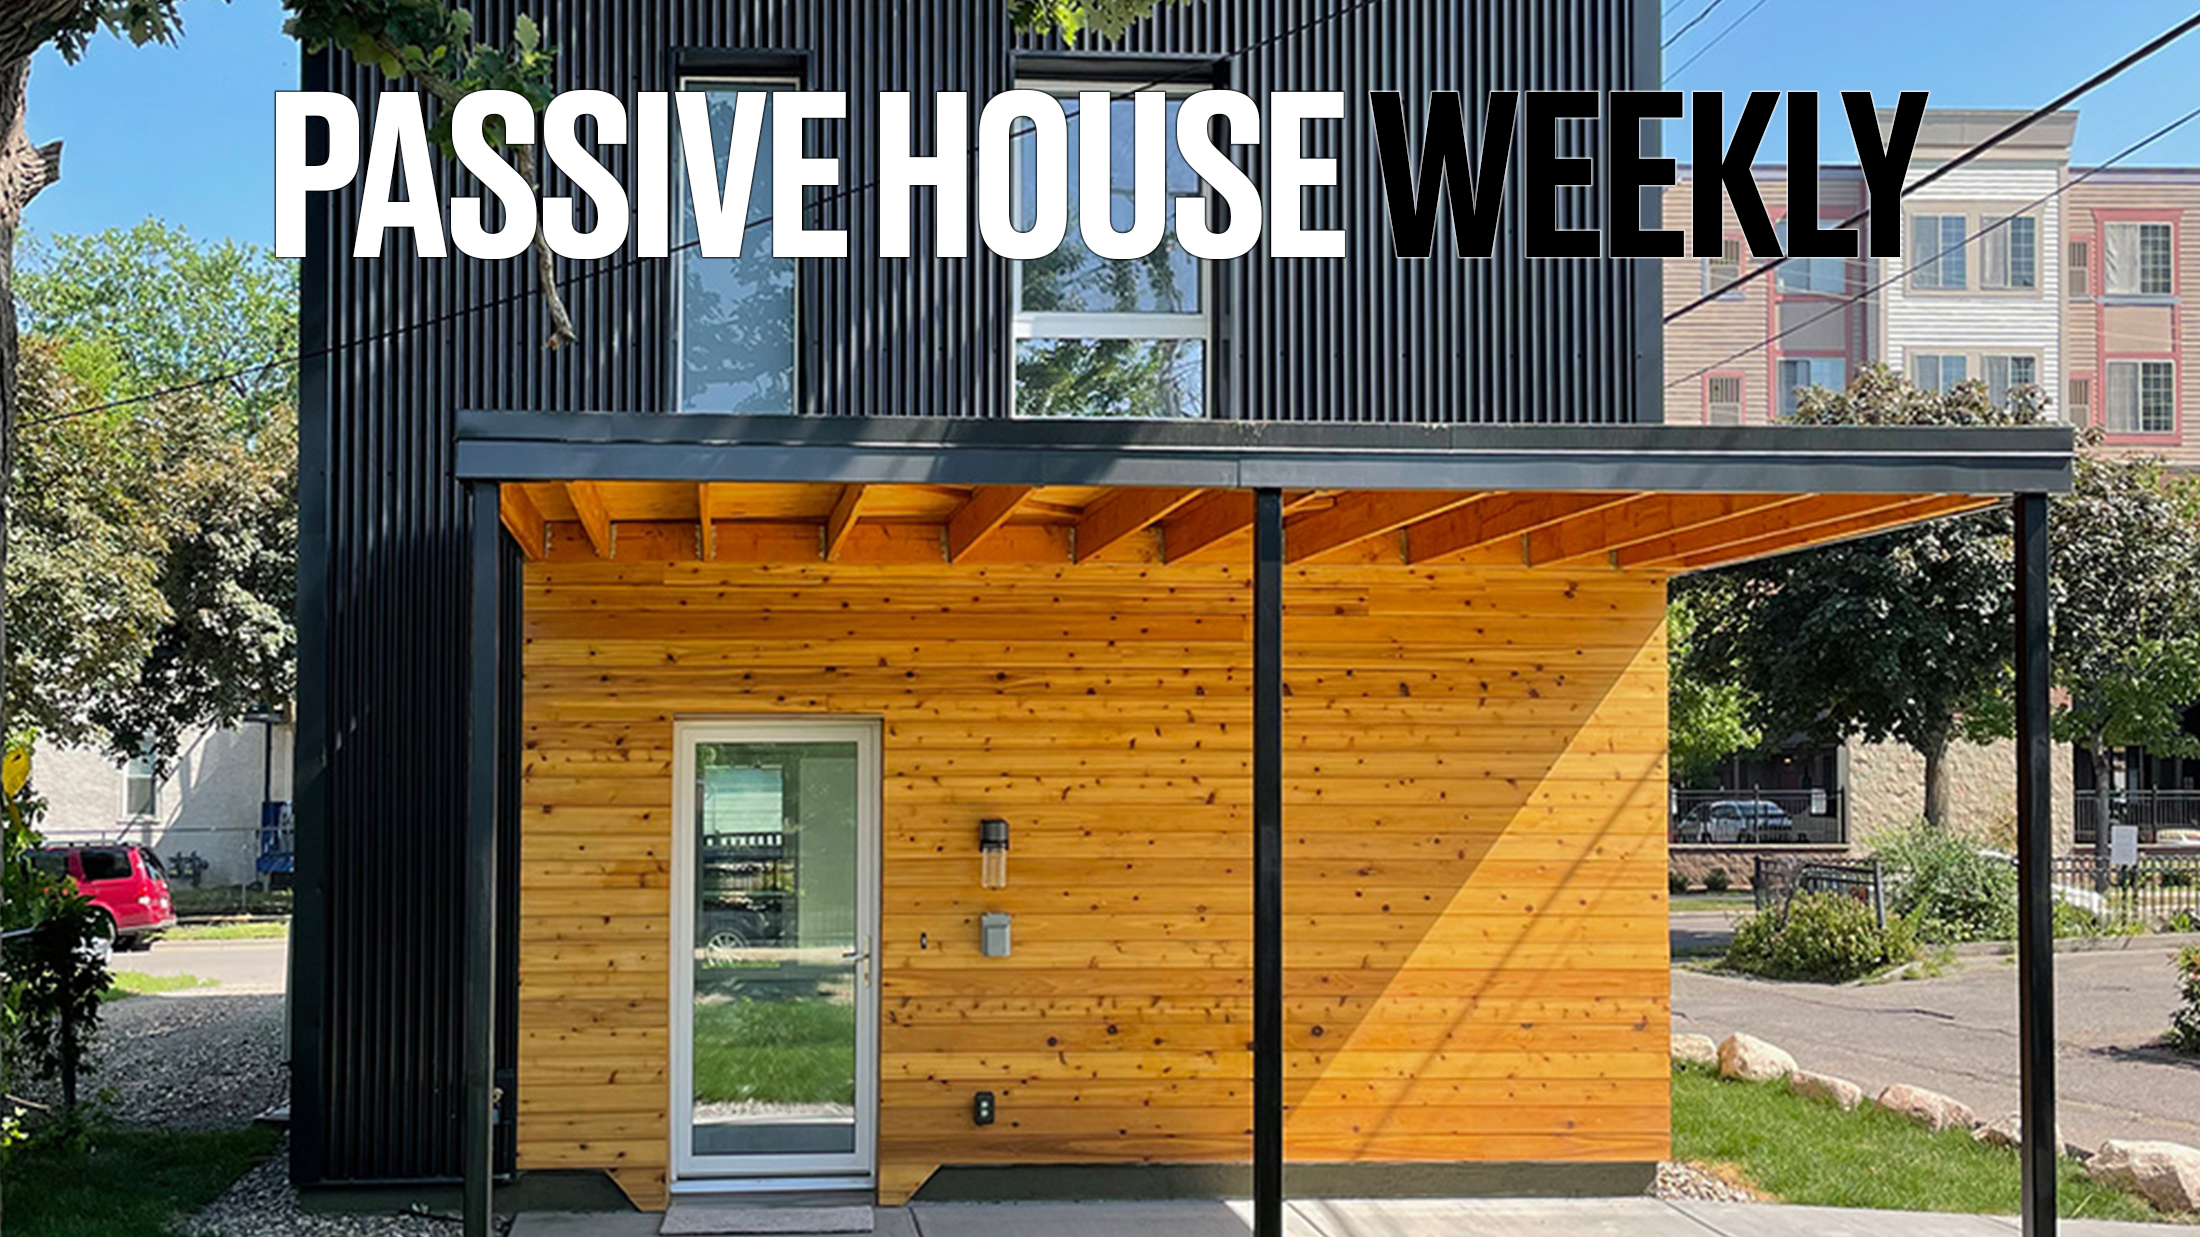 Passive House Weekly February 13th, 2022